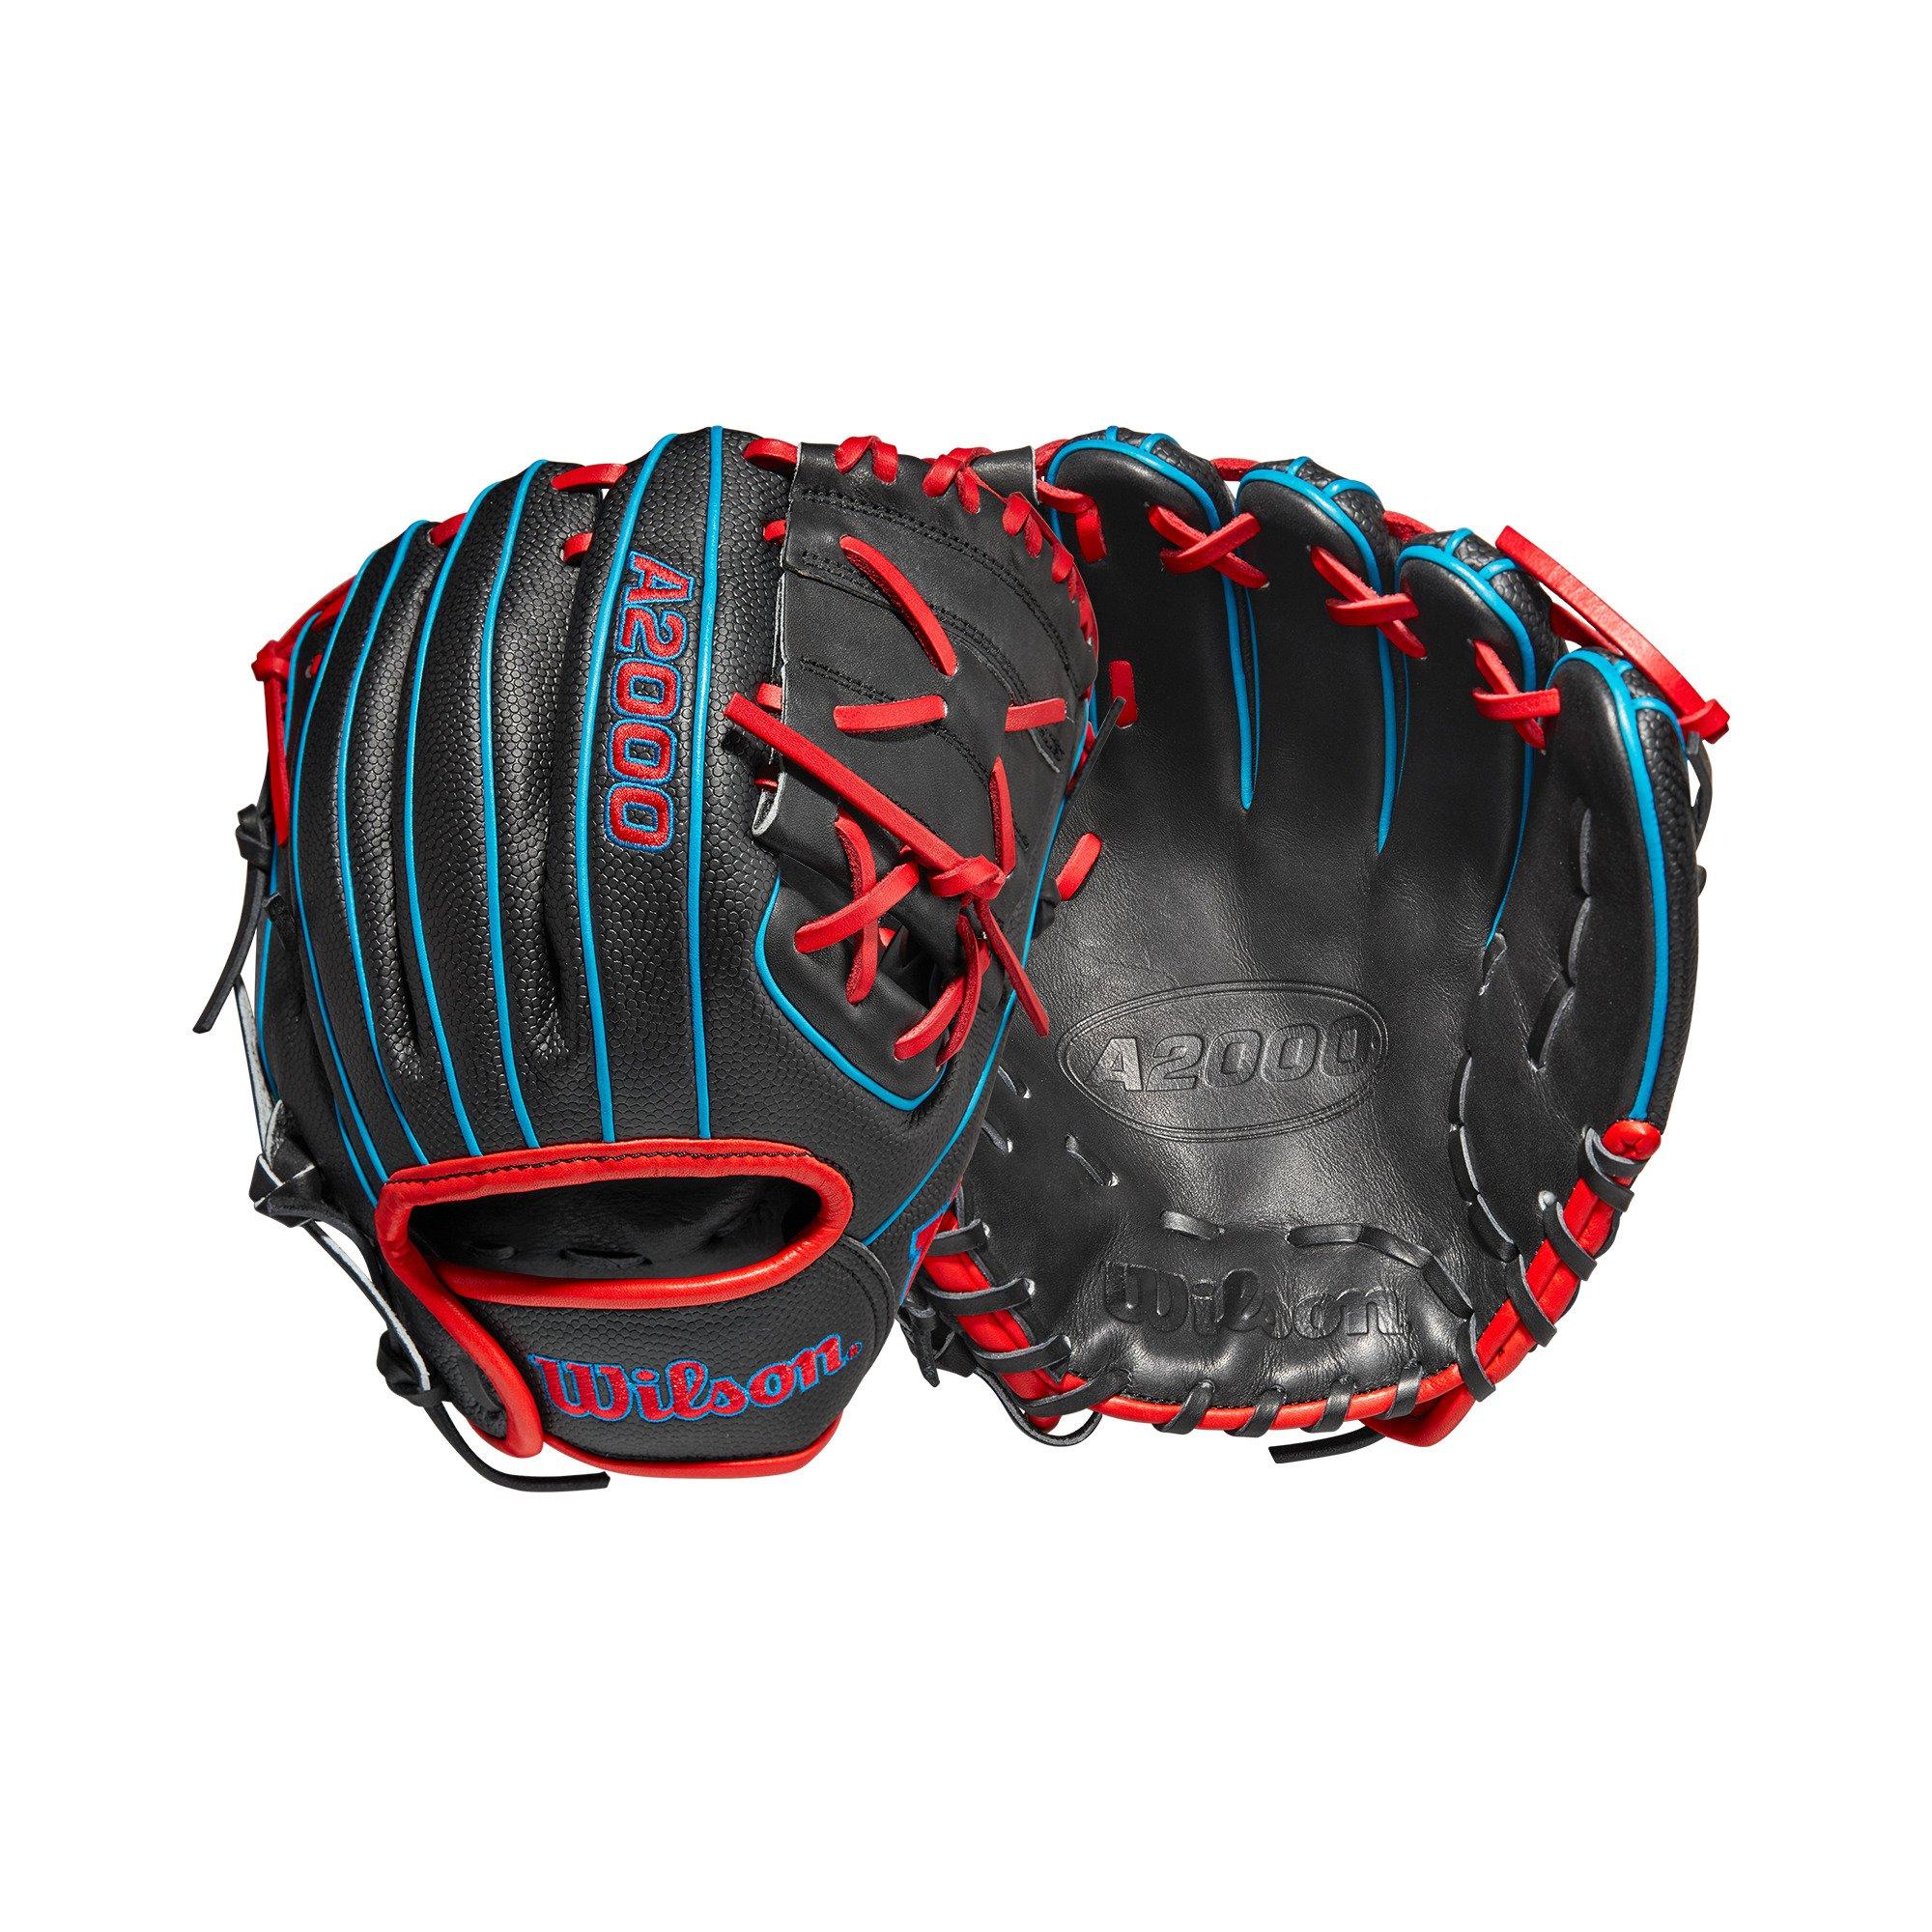 Wilson A2000 Glove Pattern Differences